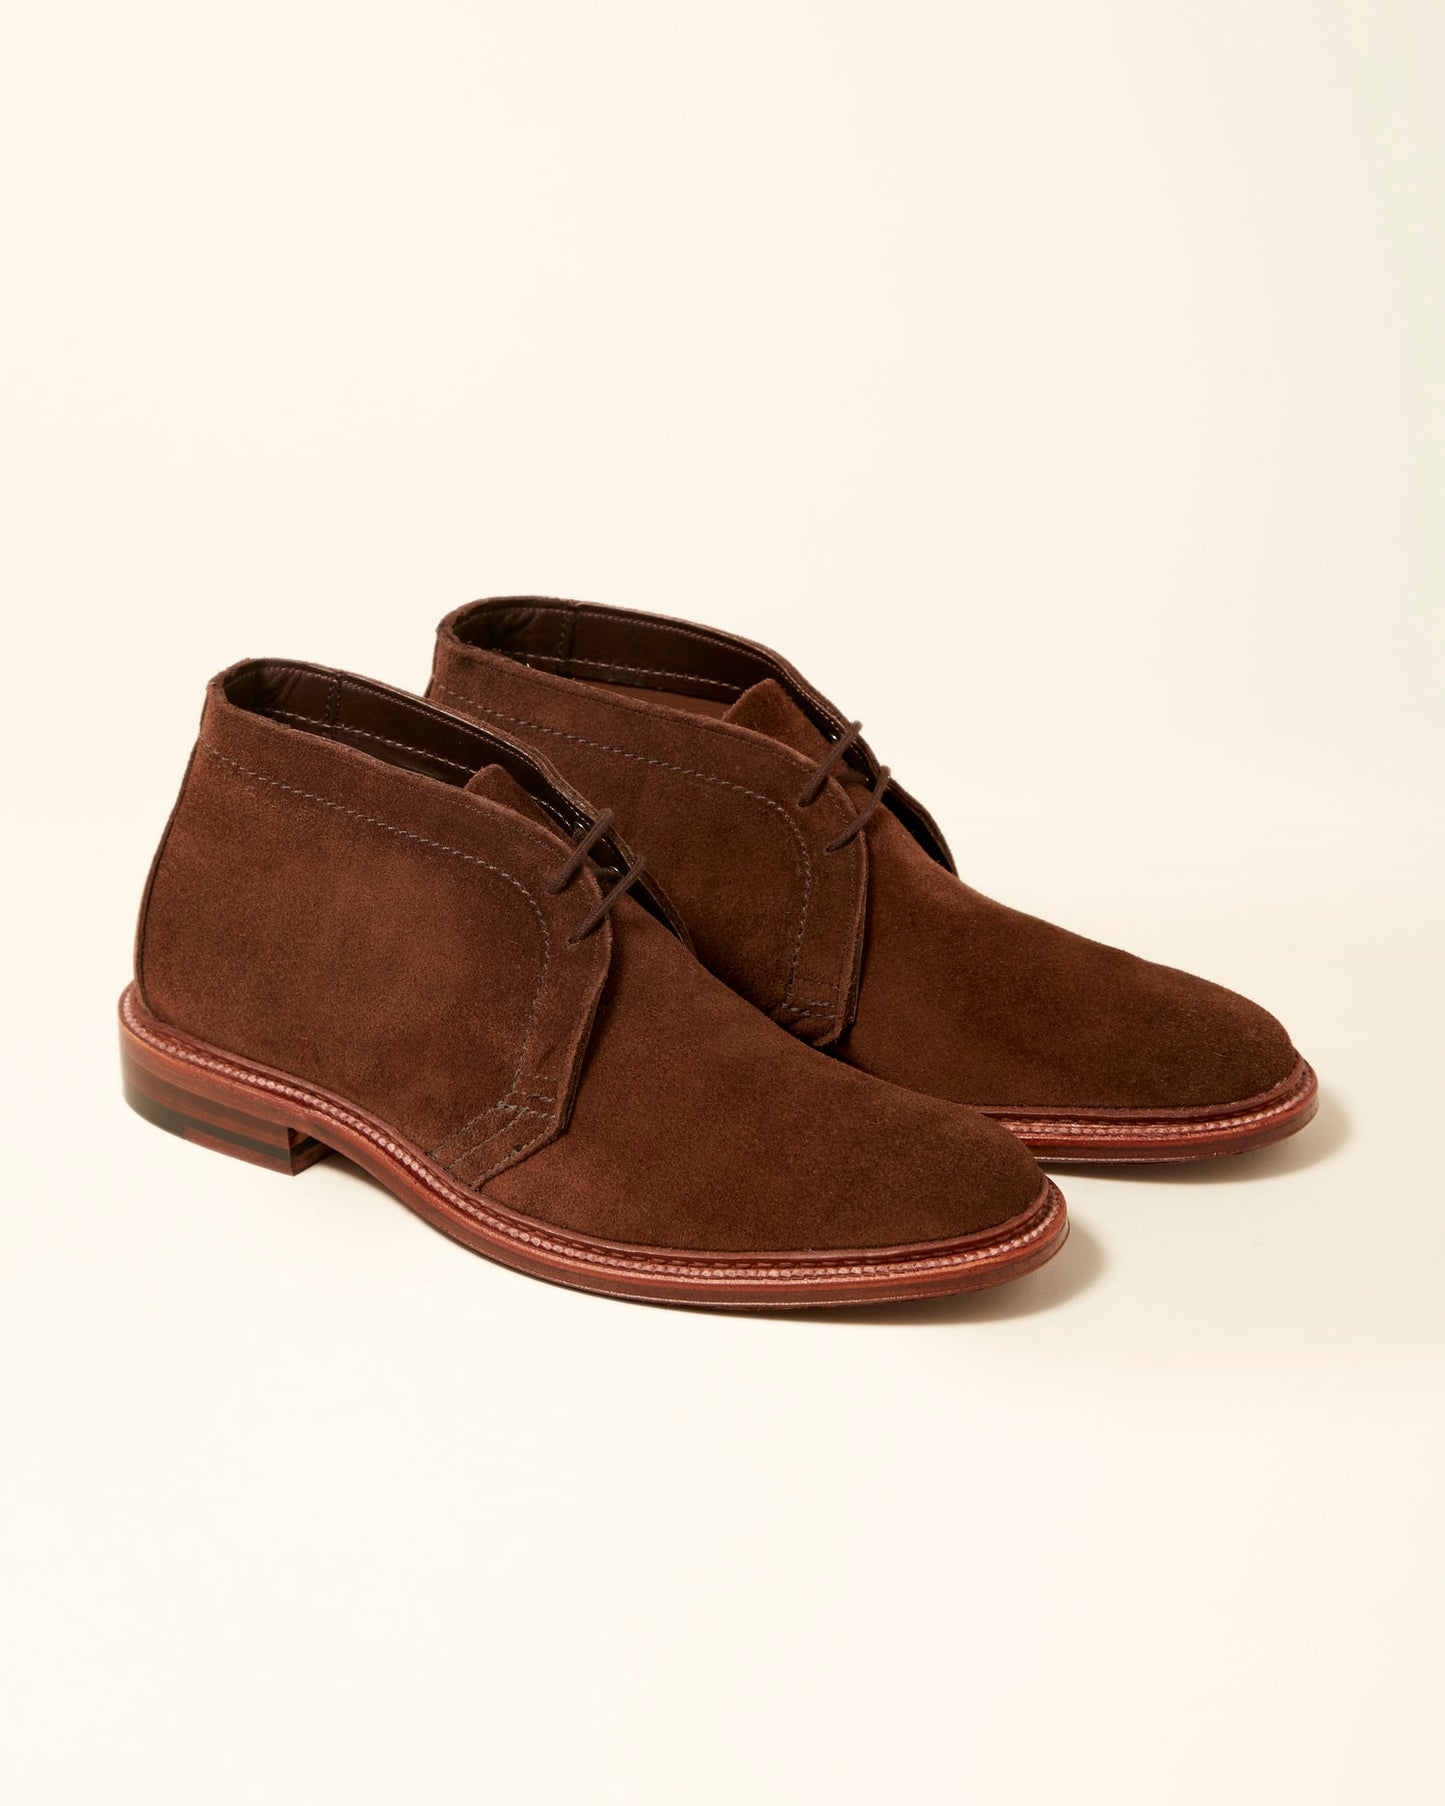 1492 Brown Suede Unlined Chukka Boot